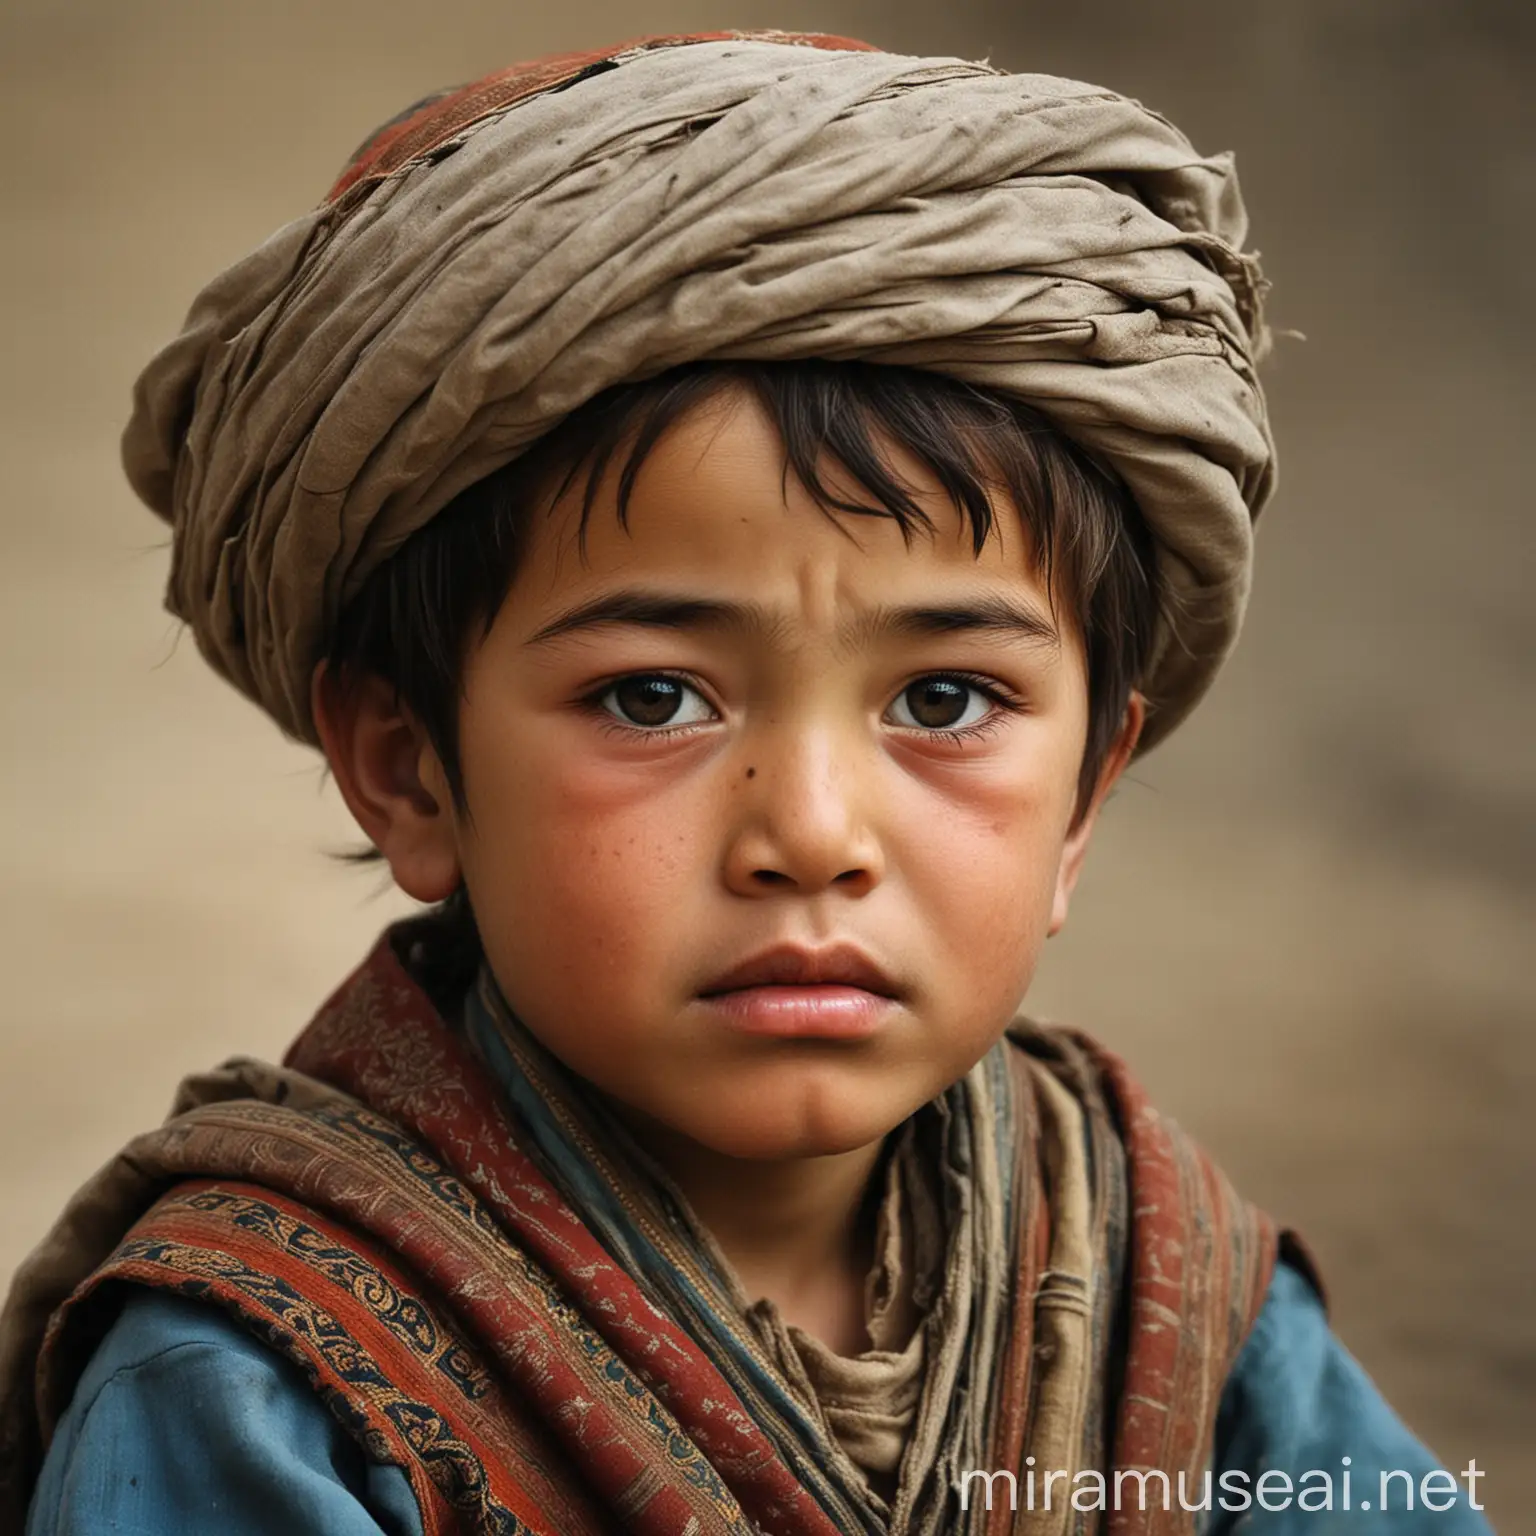 Central Asian Boy from the Era of Amir Timur